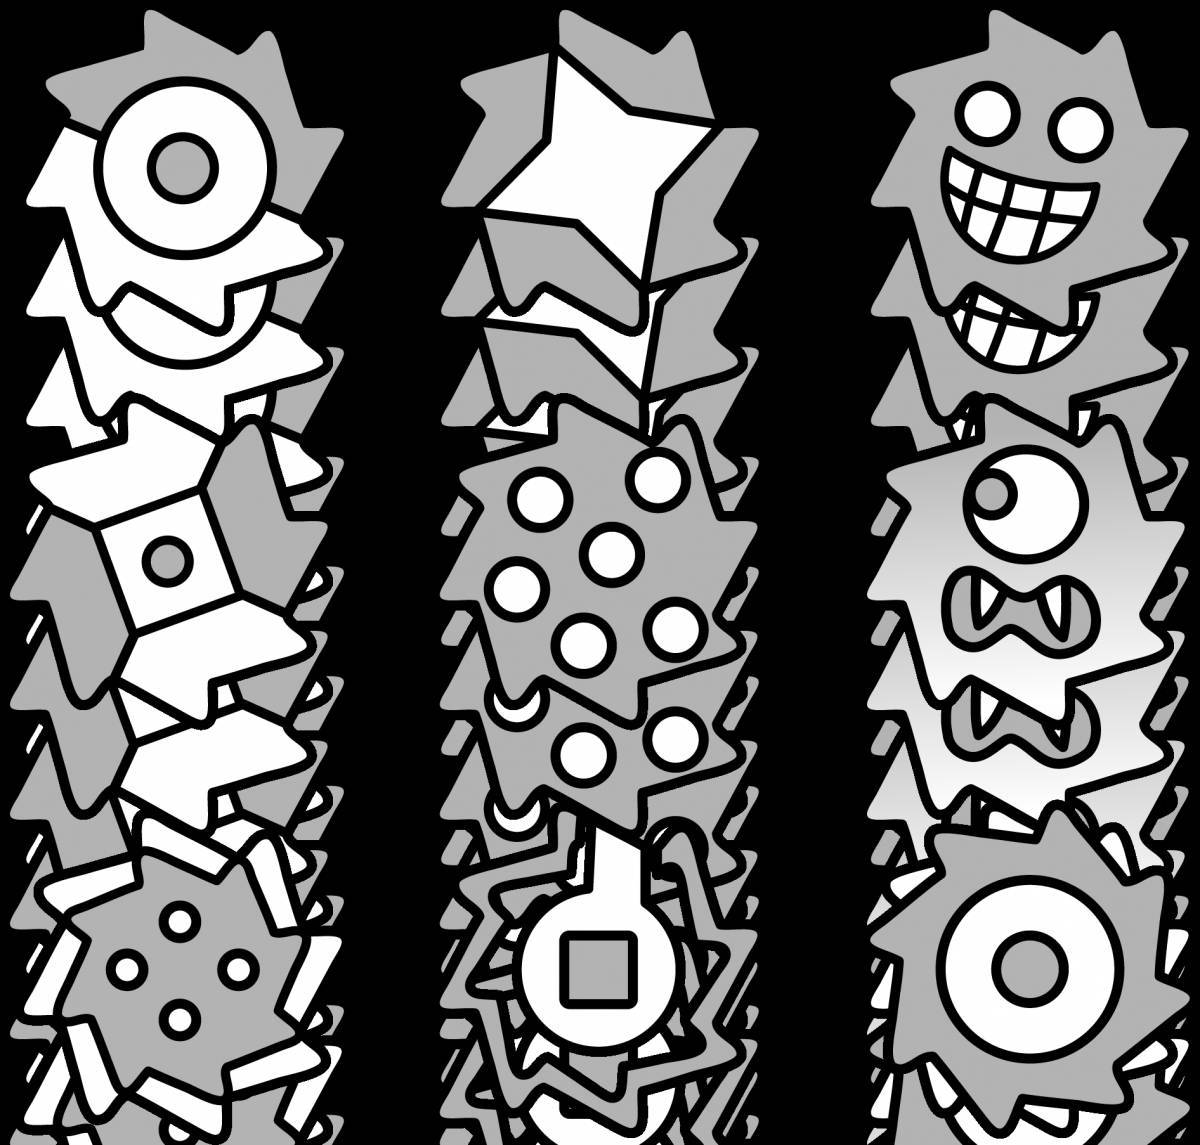 Coloring-jaunt geometry dash coloring page